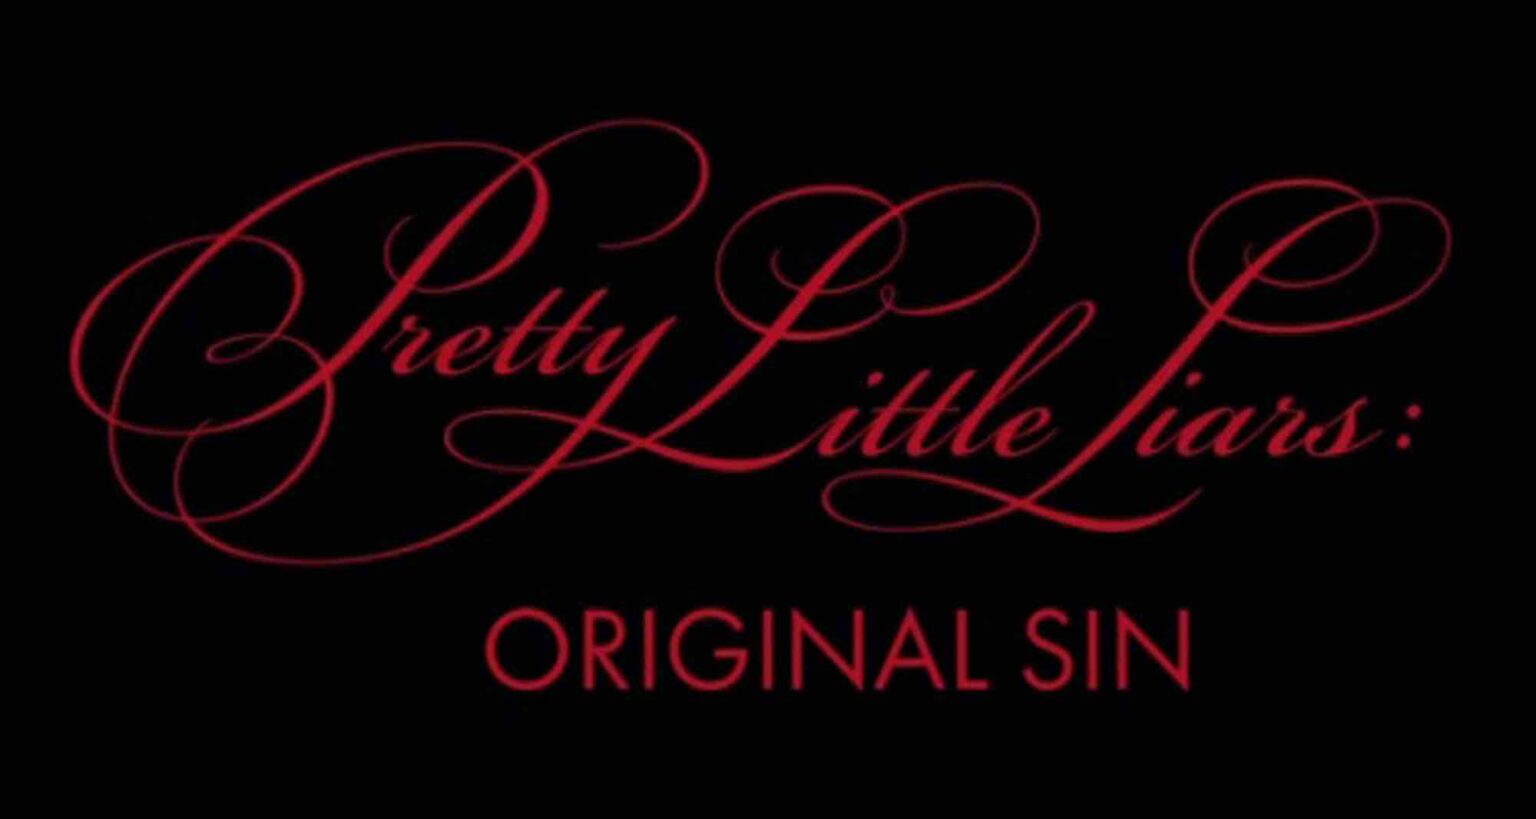 'Pretty Little Liars' is coming back to television in an upcoming reboot. Meet the talented cast for 'Pretty Little Liars: Original Sin' now.